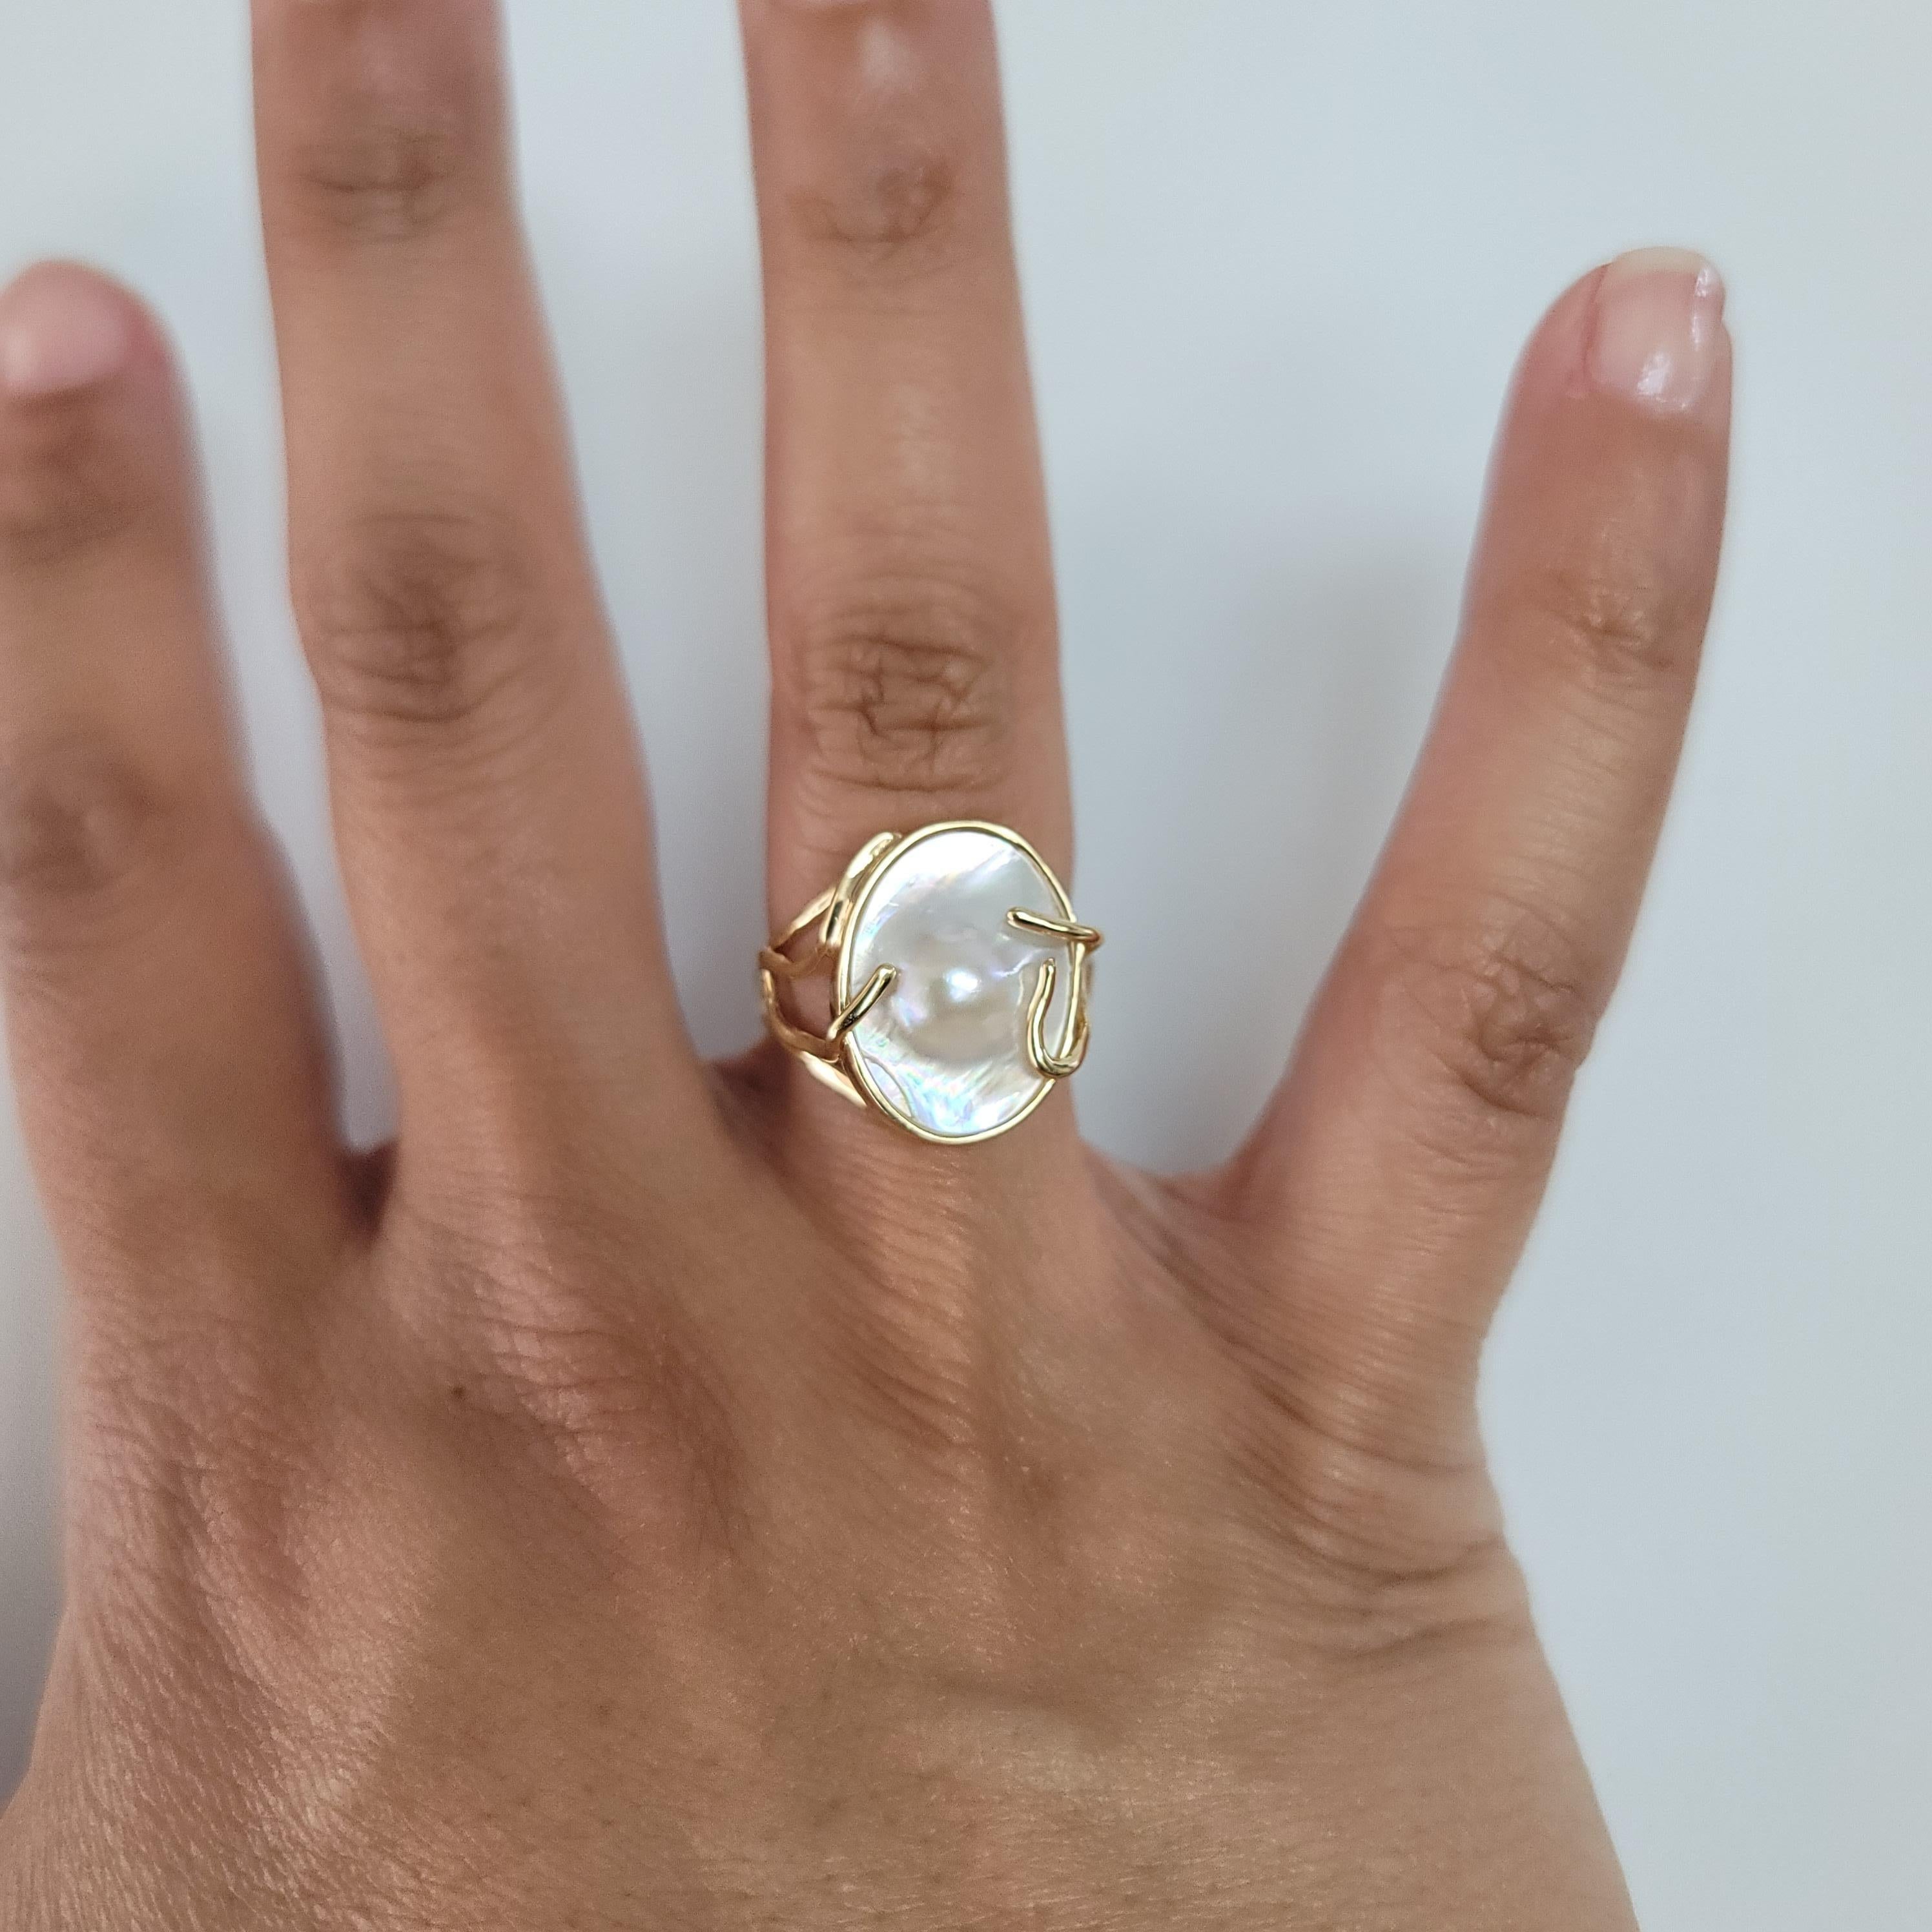 ♥ Product Summary ♥

Main Stone: Mother of Pearl
Band Material: 14k Yellow Gold
Dimensions: 17mm x 15mm
Weight 4 grams
